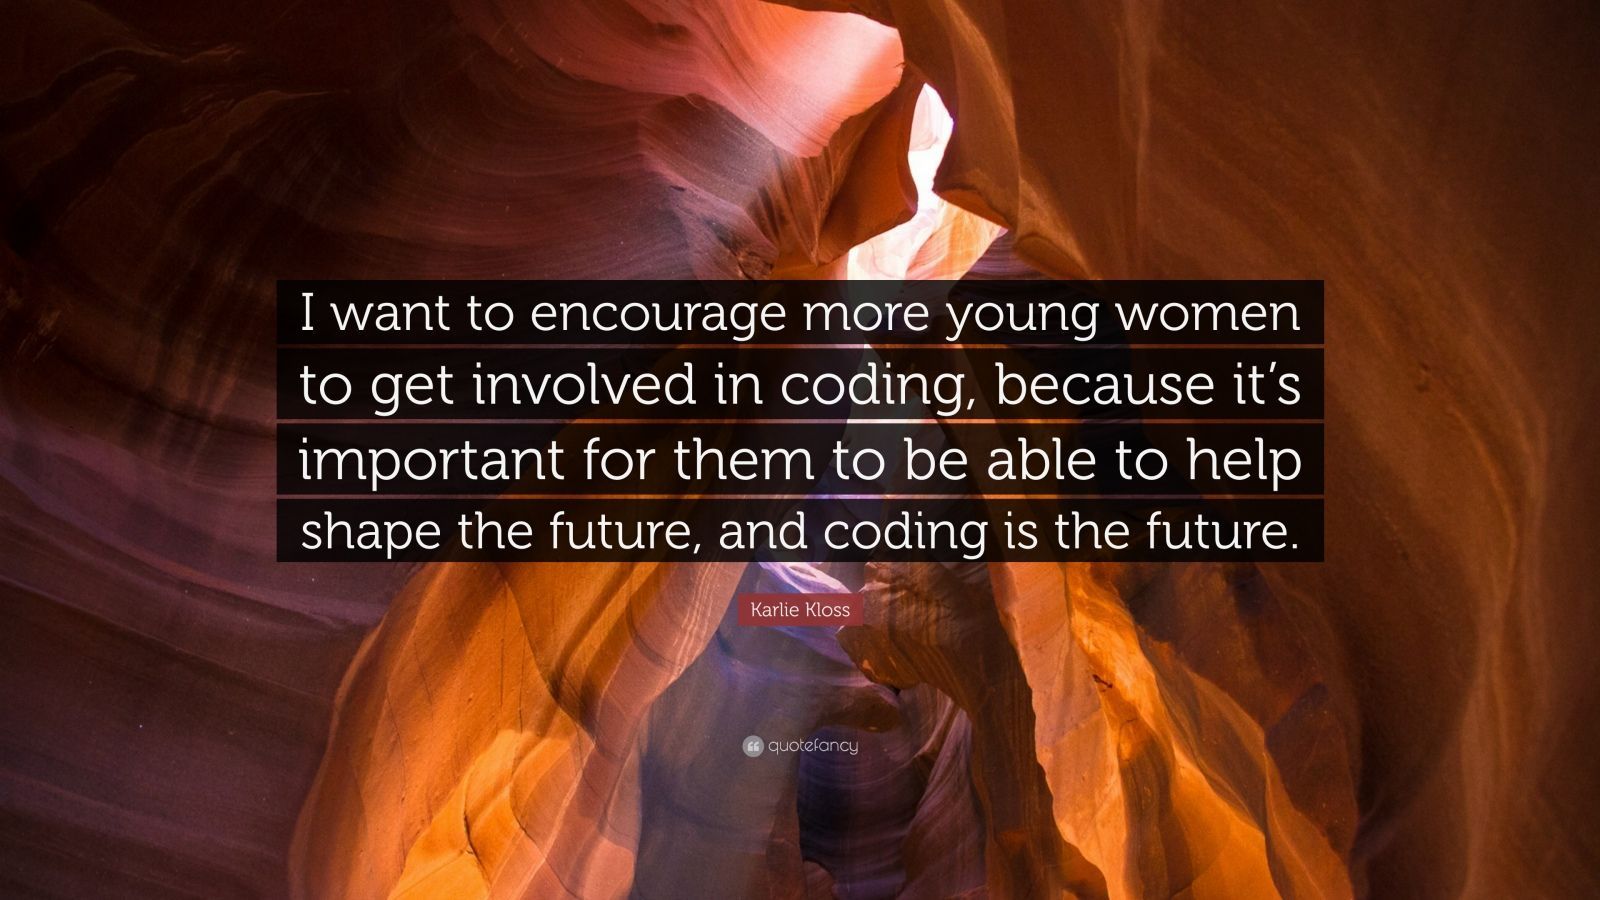 Karlie Kloss Quote: “I want to encourage more young women to get involved in coding, because it's important for them to be able to help shape.” (7 wallpaper)